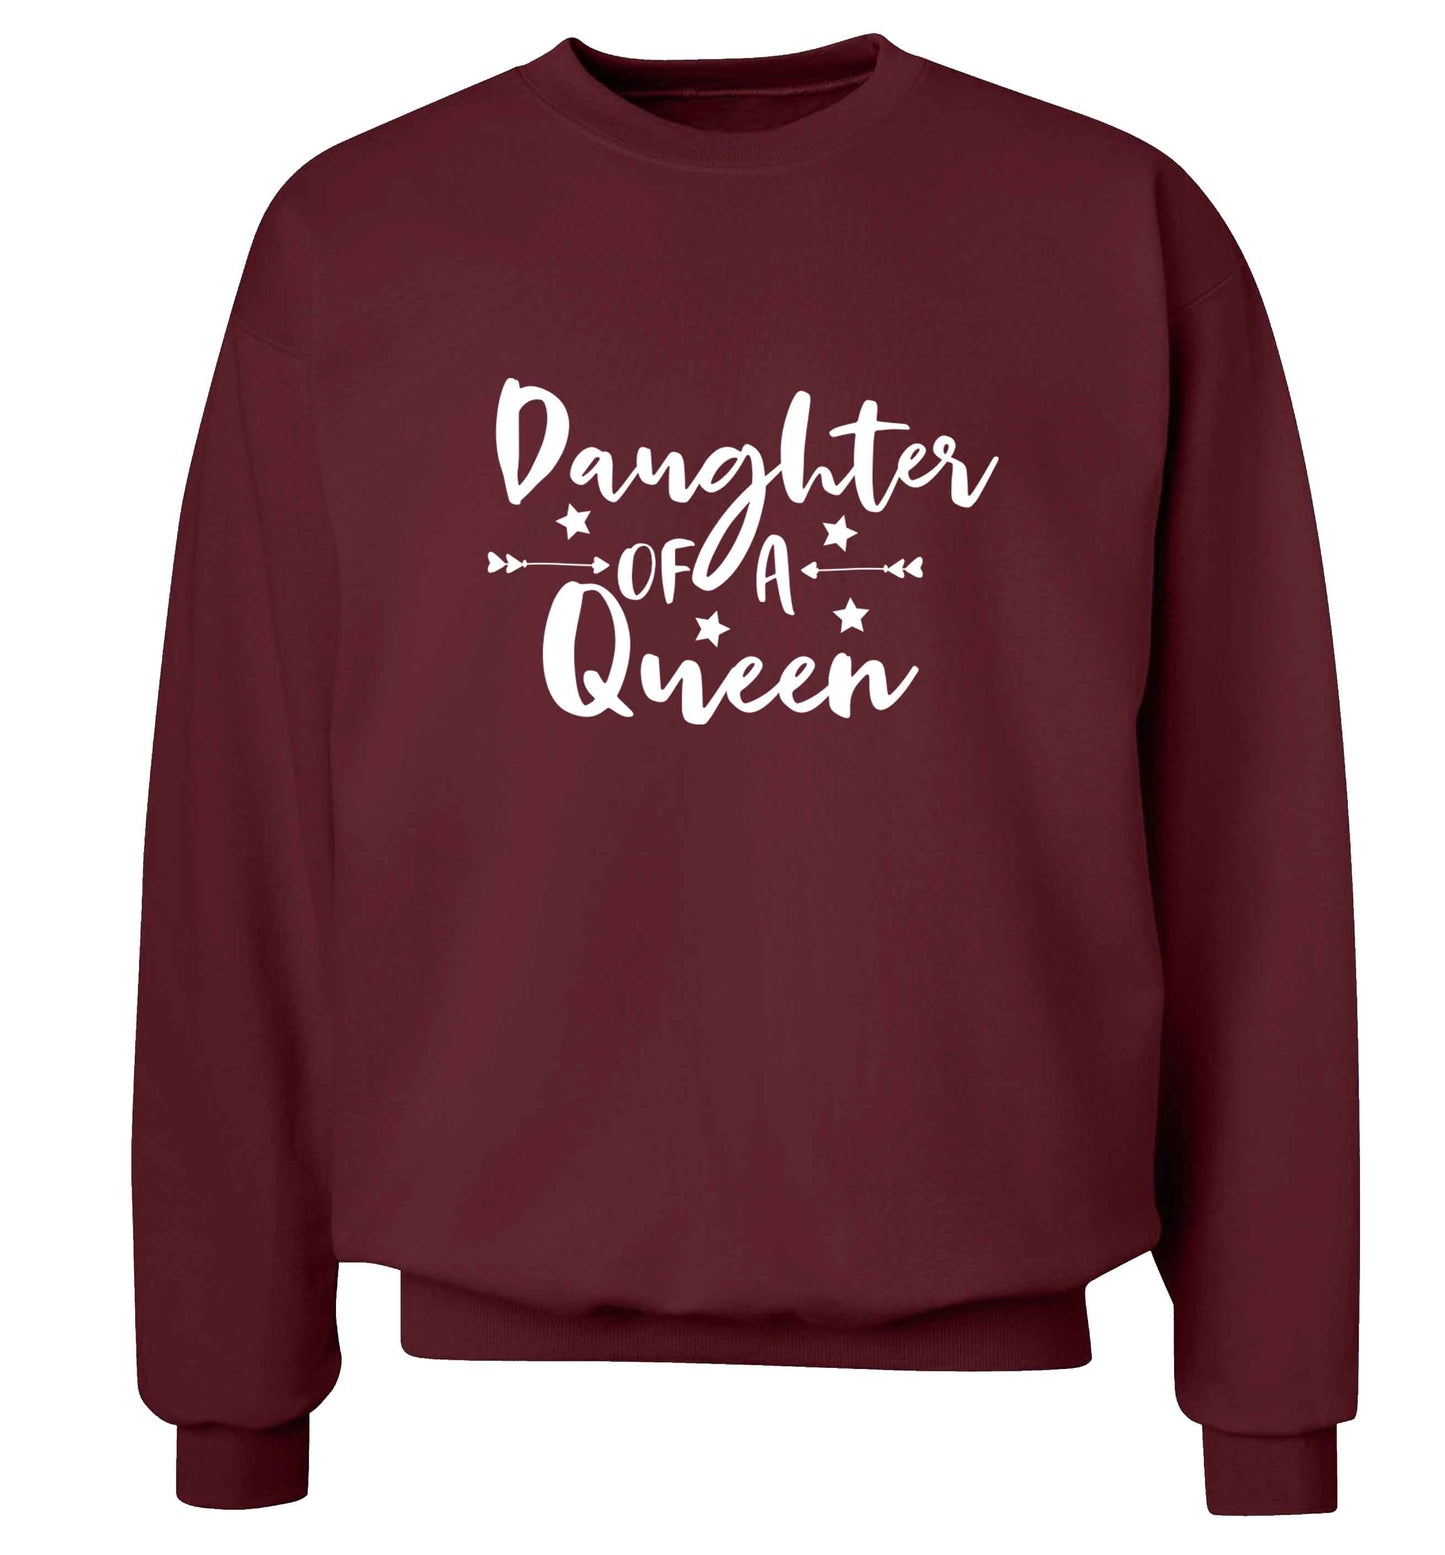 Daughter of a Queen adult's unisex maroon sweater 2XL